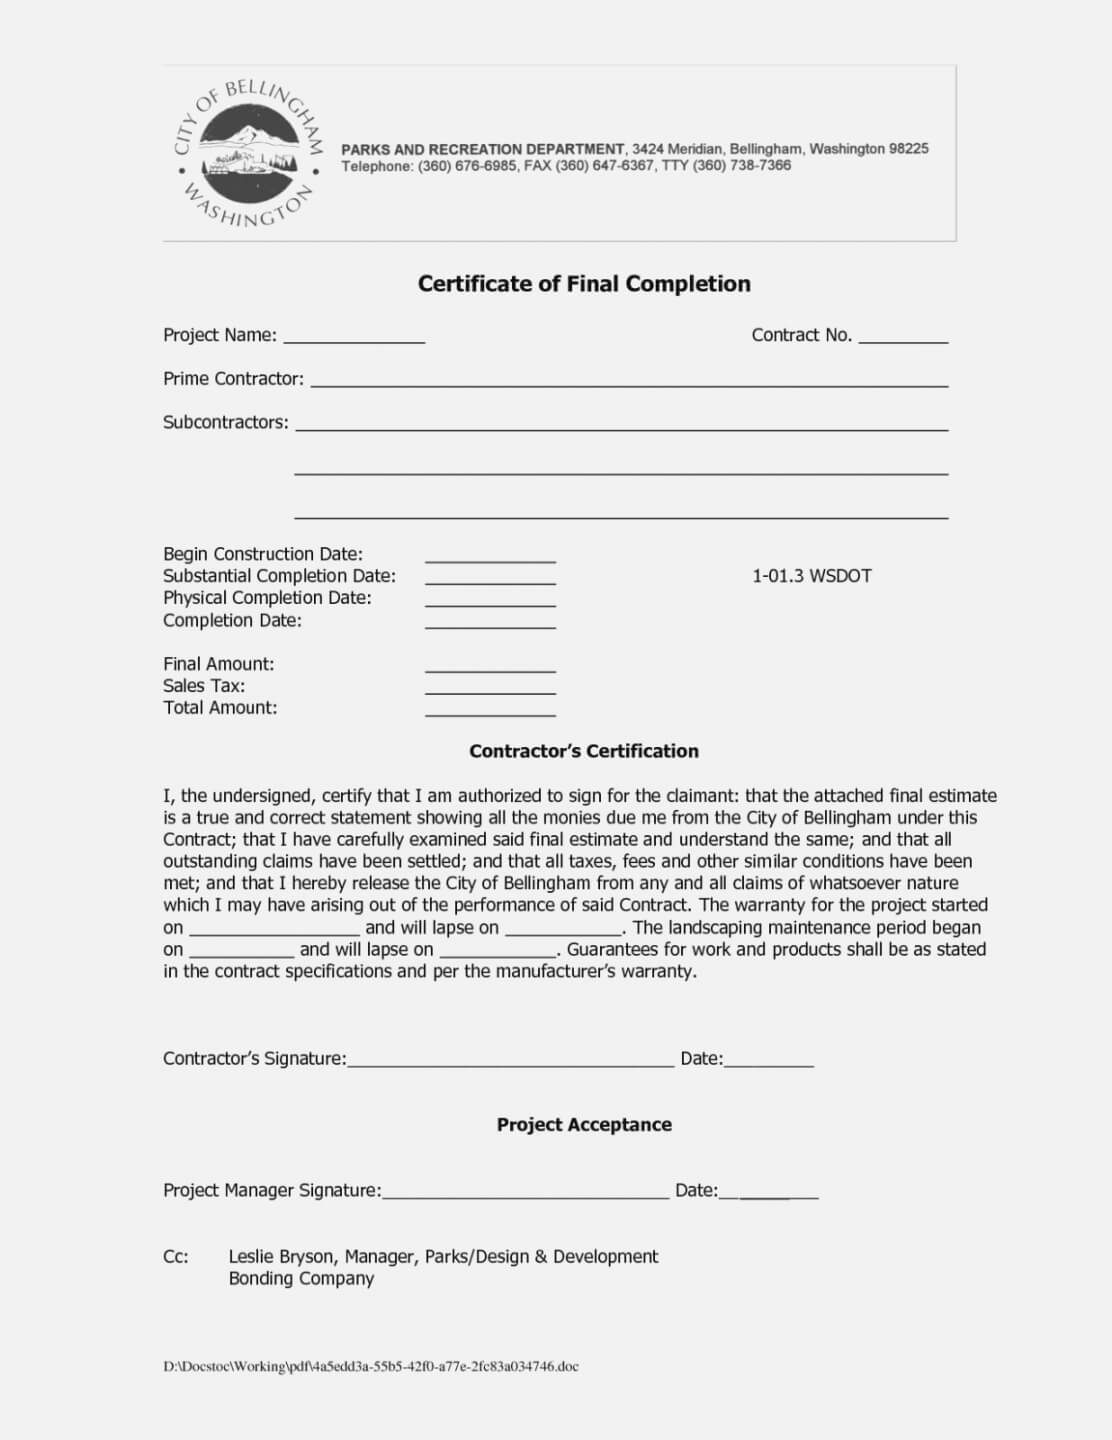 Roofing Certificate Of Completion Template – Zimer.bwong.co Inside Construction Certificate Of Completion Template